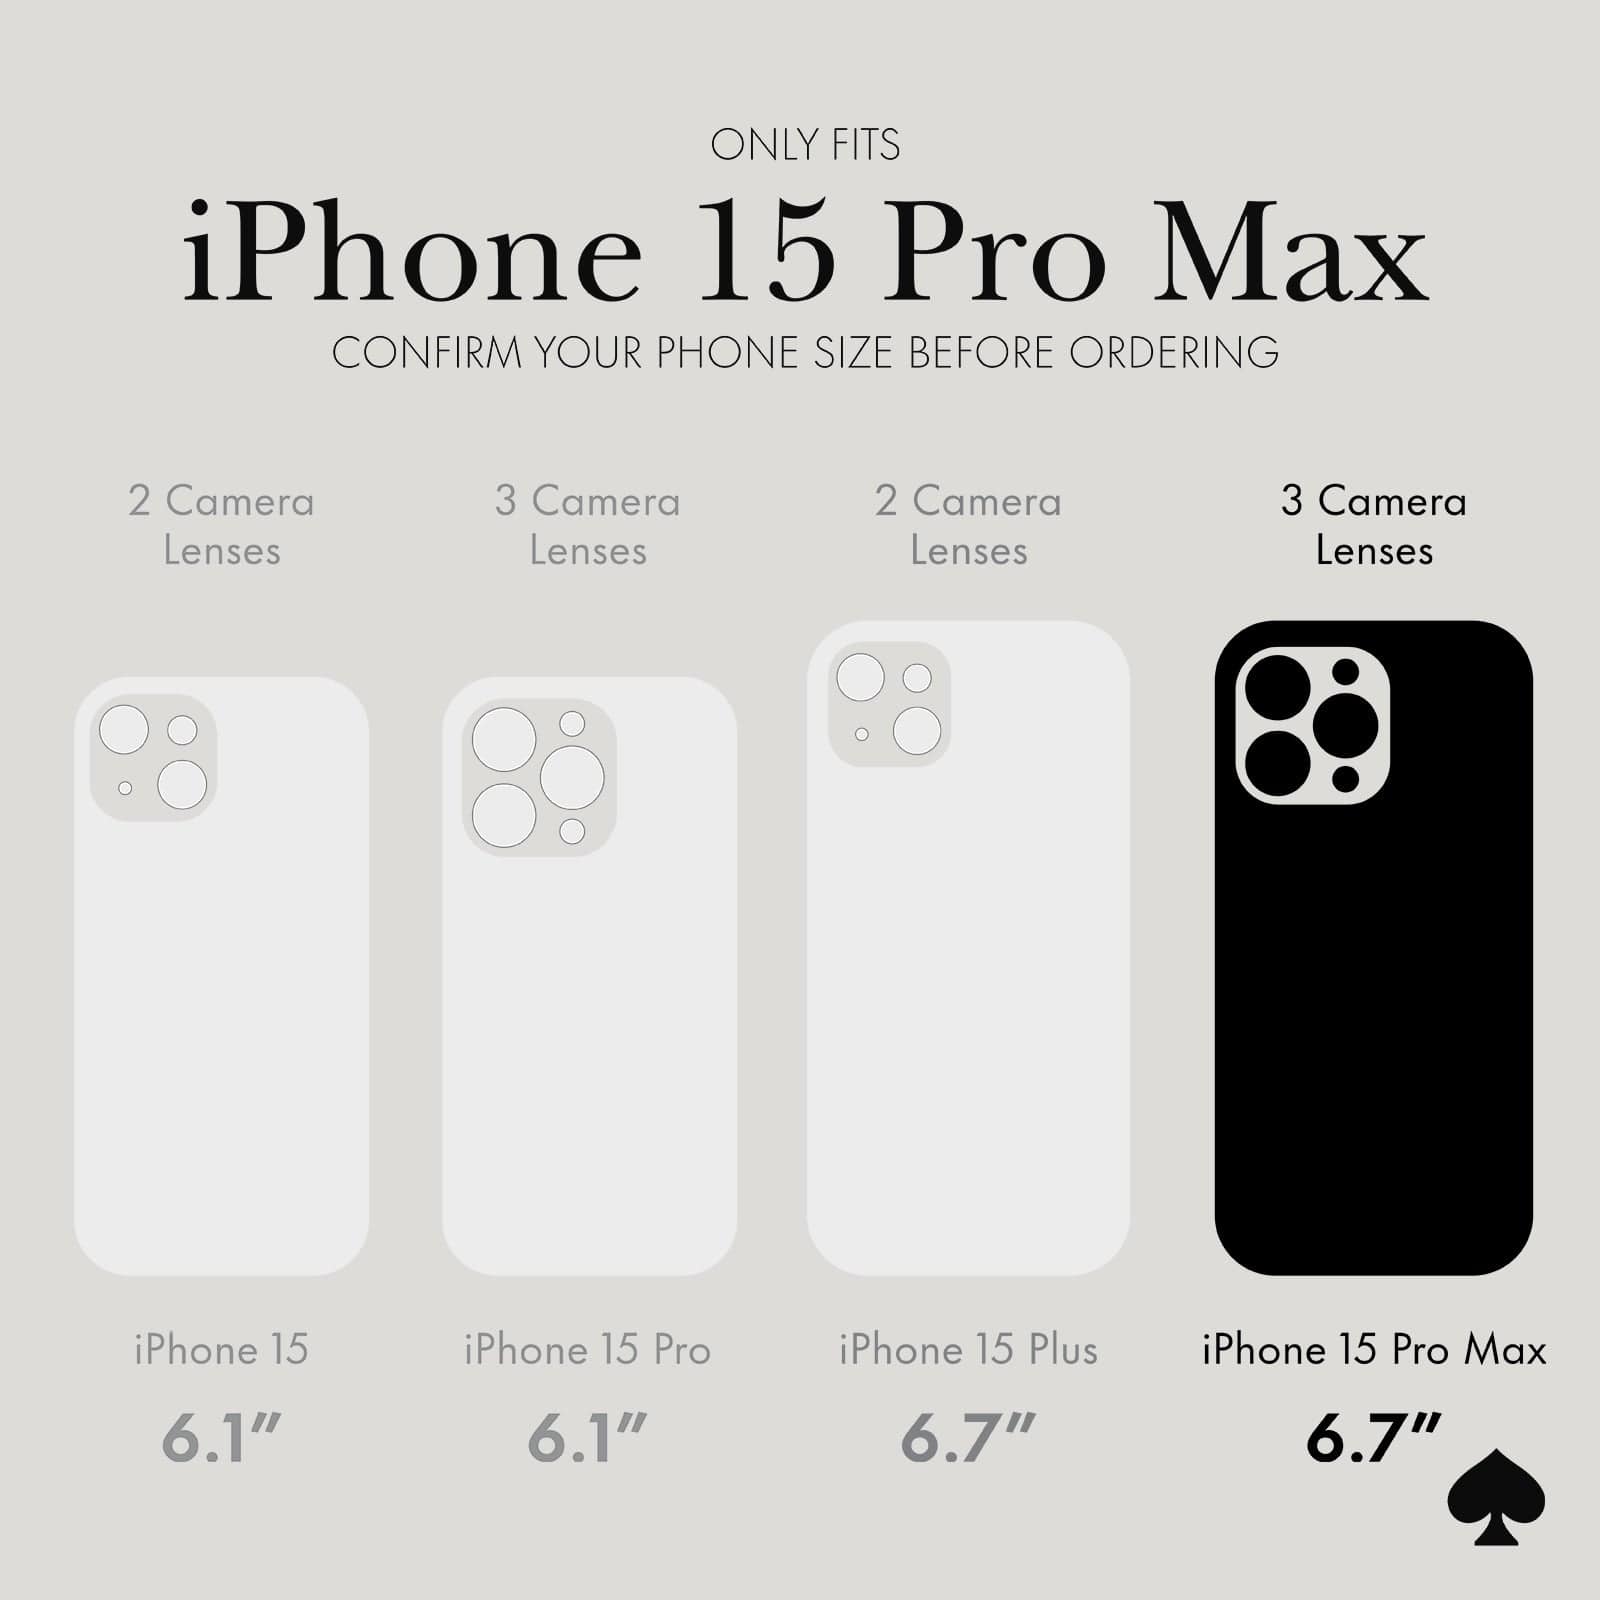 ONLY FITS IPHONE 15 PRO MAX. CONFIRM YOUR PHONE SIZE BFORE ORDERING